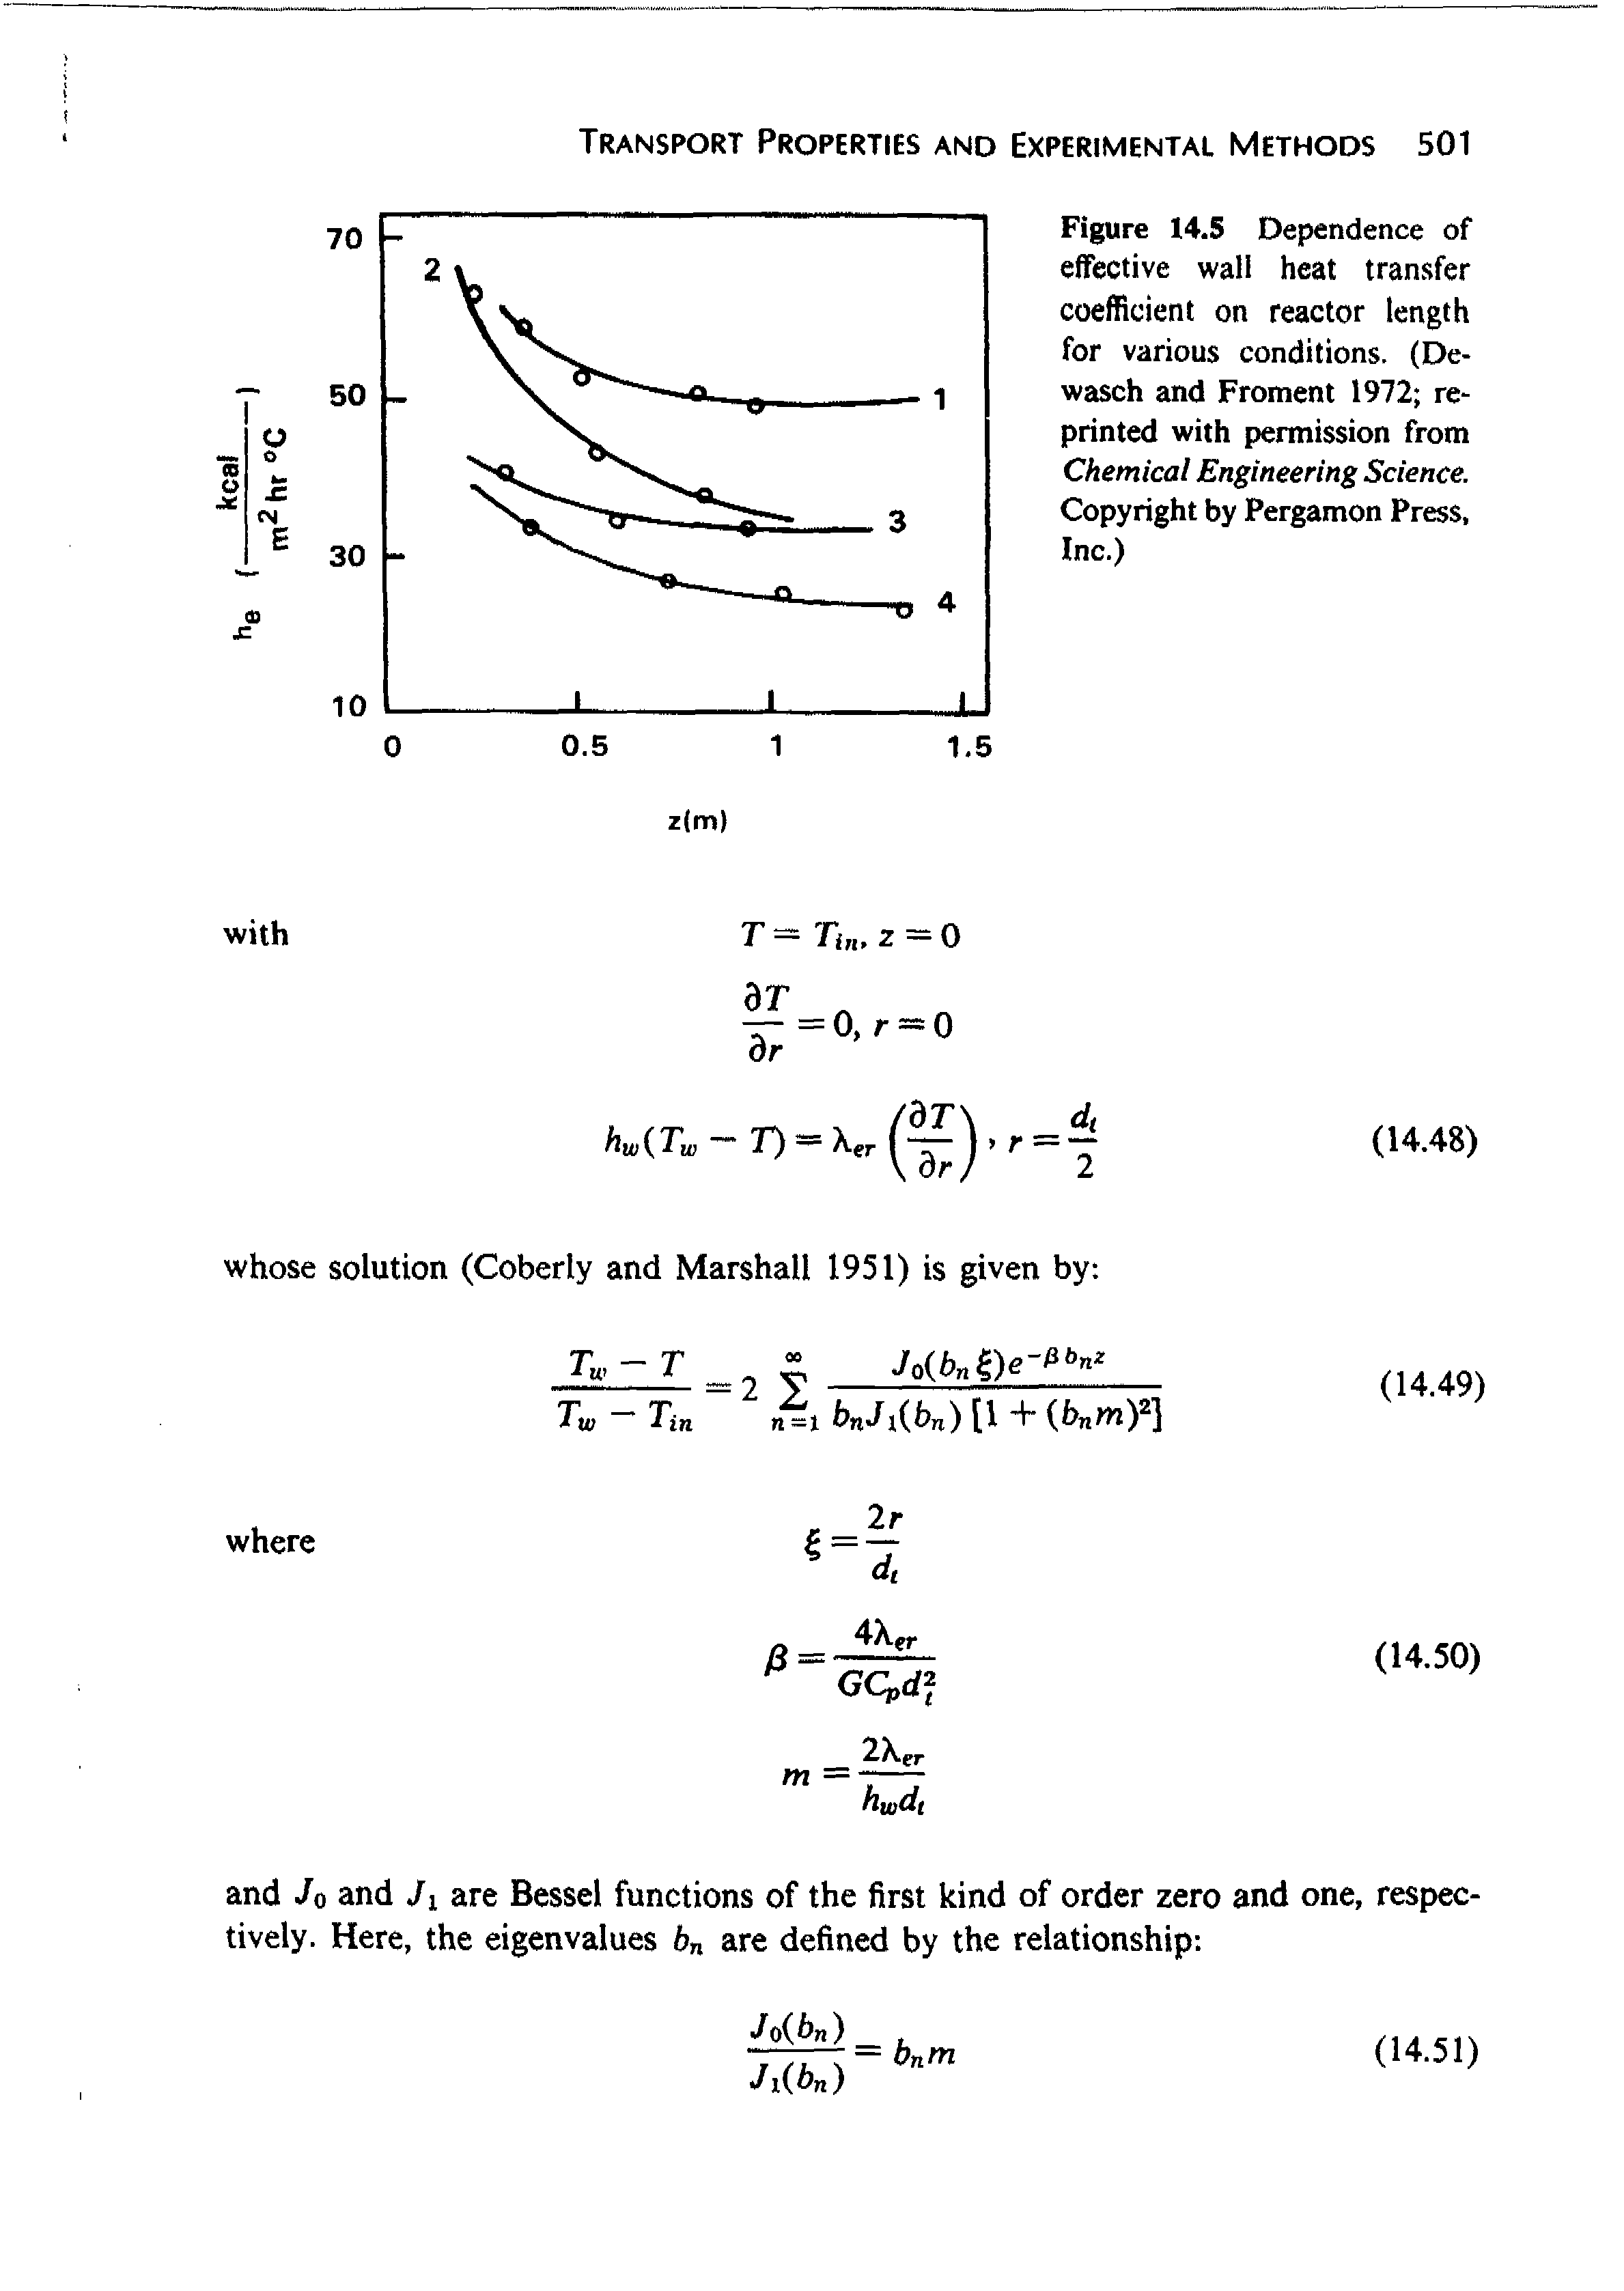 Figure 14.5 Dependence of effective wall heat transfer coefficient on reactor length for various conditions. (De-wasch and Froment 1972 reprinted with permission from Chemical Engineering Science. Copyright by Pergamon Press, Inc.)...